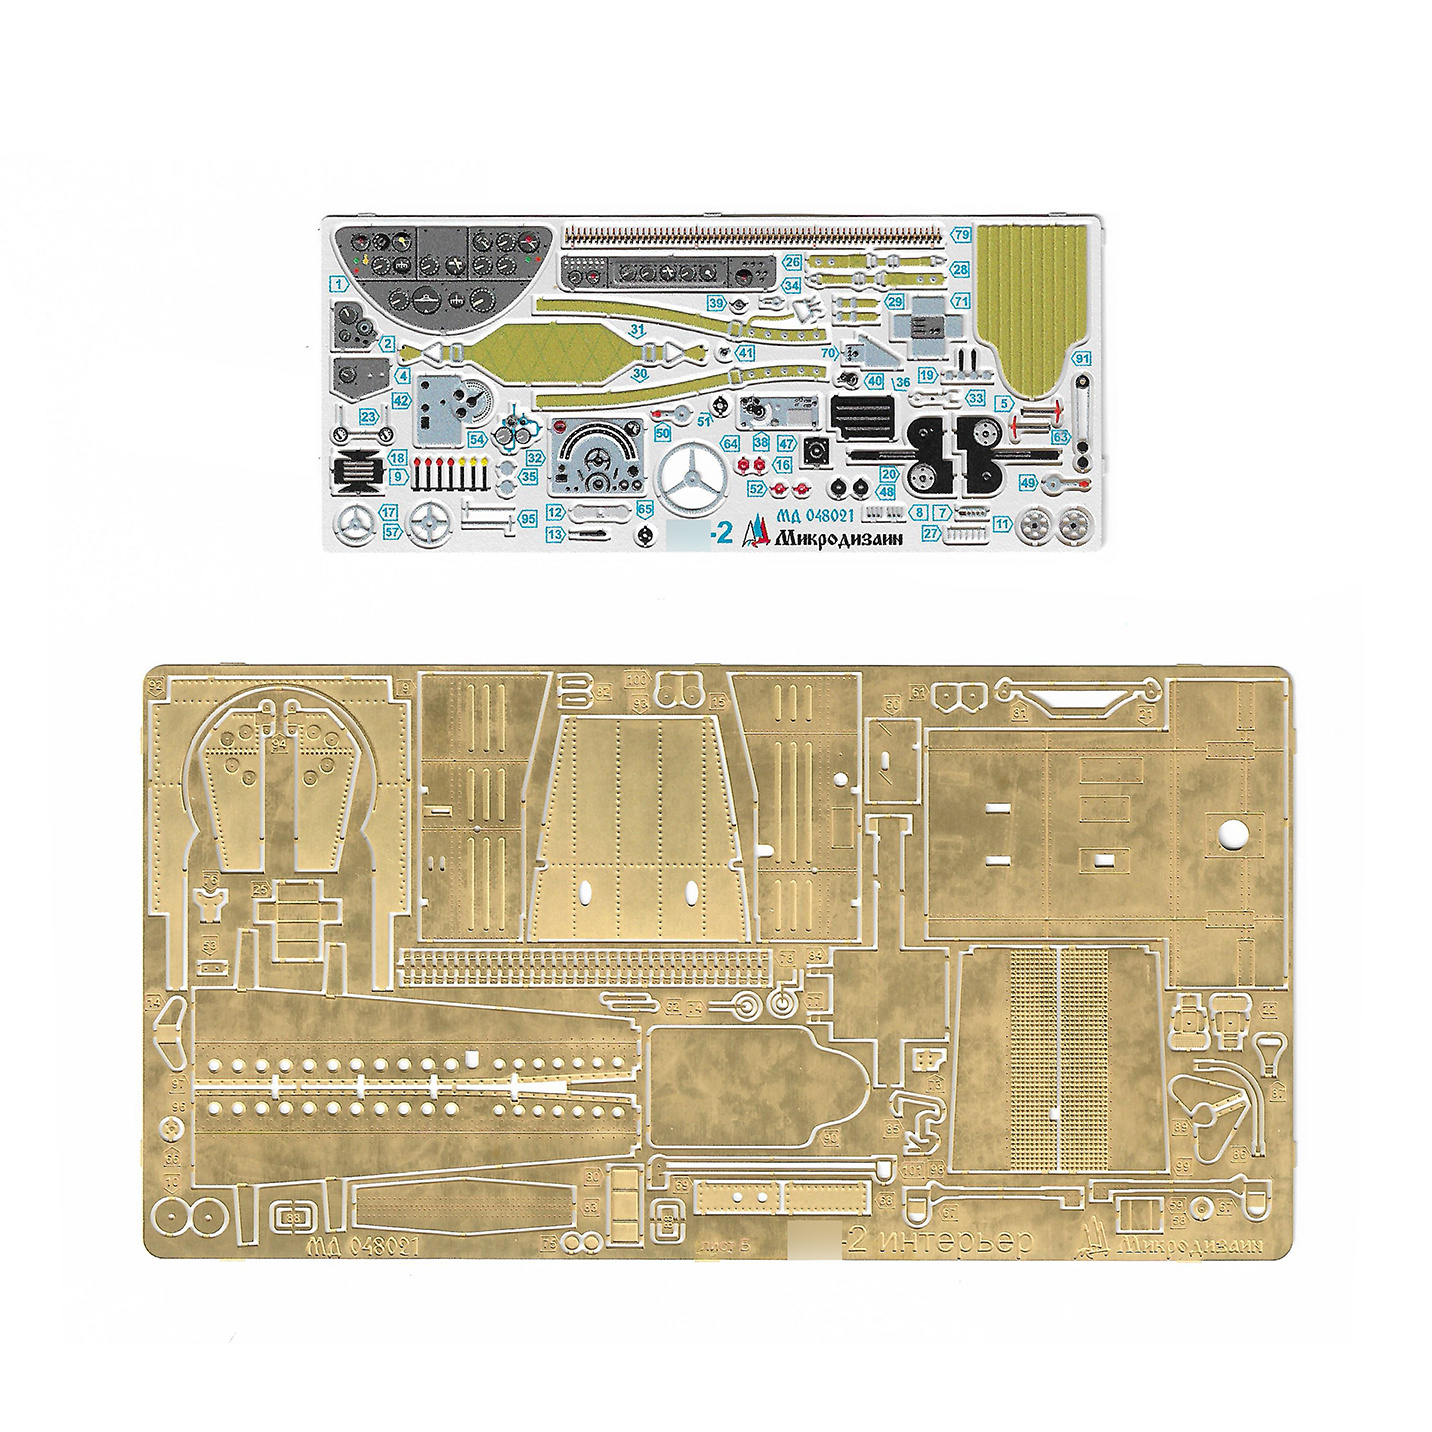 048021 Microdesign 1/48 Photo Etching Kit for Sukhoi-2 cabin from Zvezda